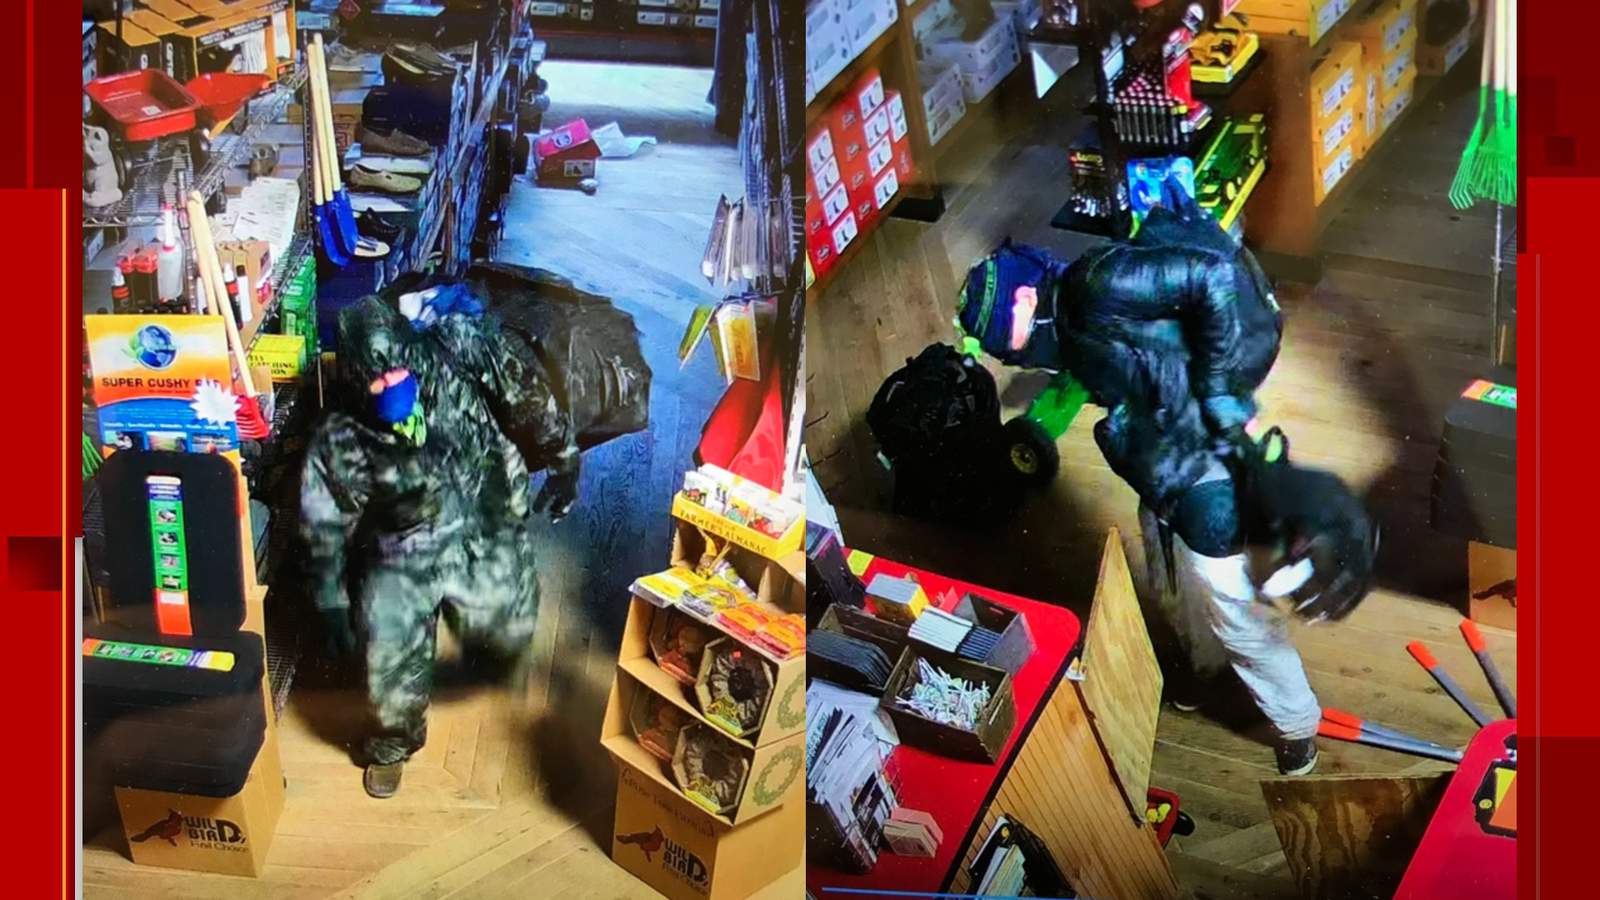 Camouflaged man steals more than $6,600 in items from Franklin County store